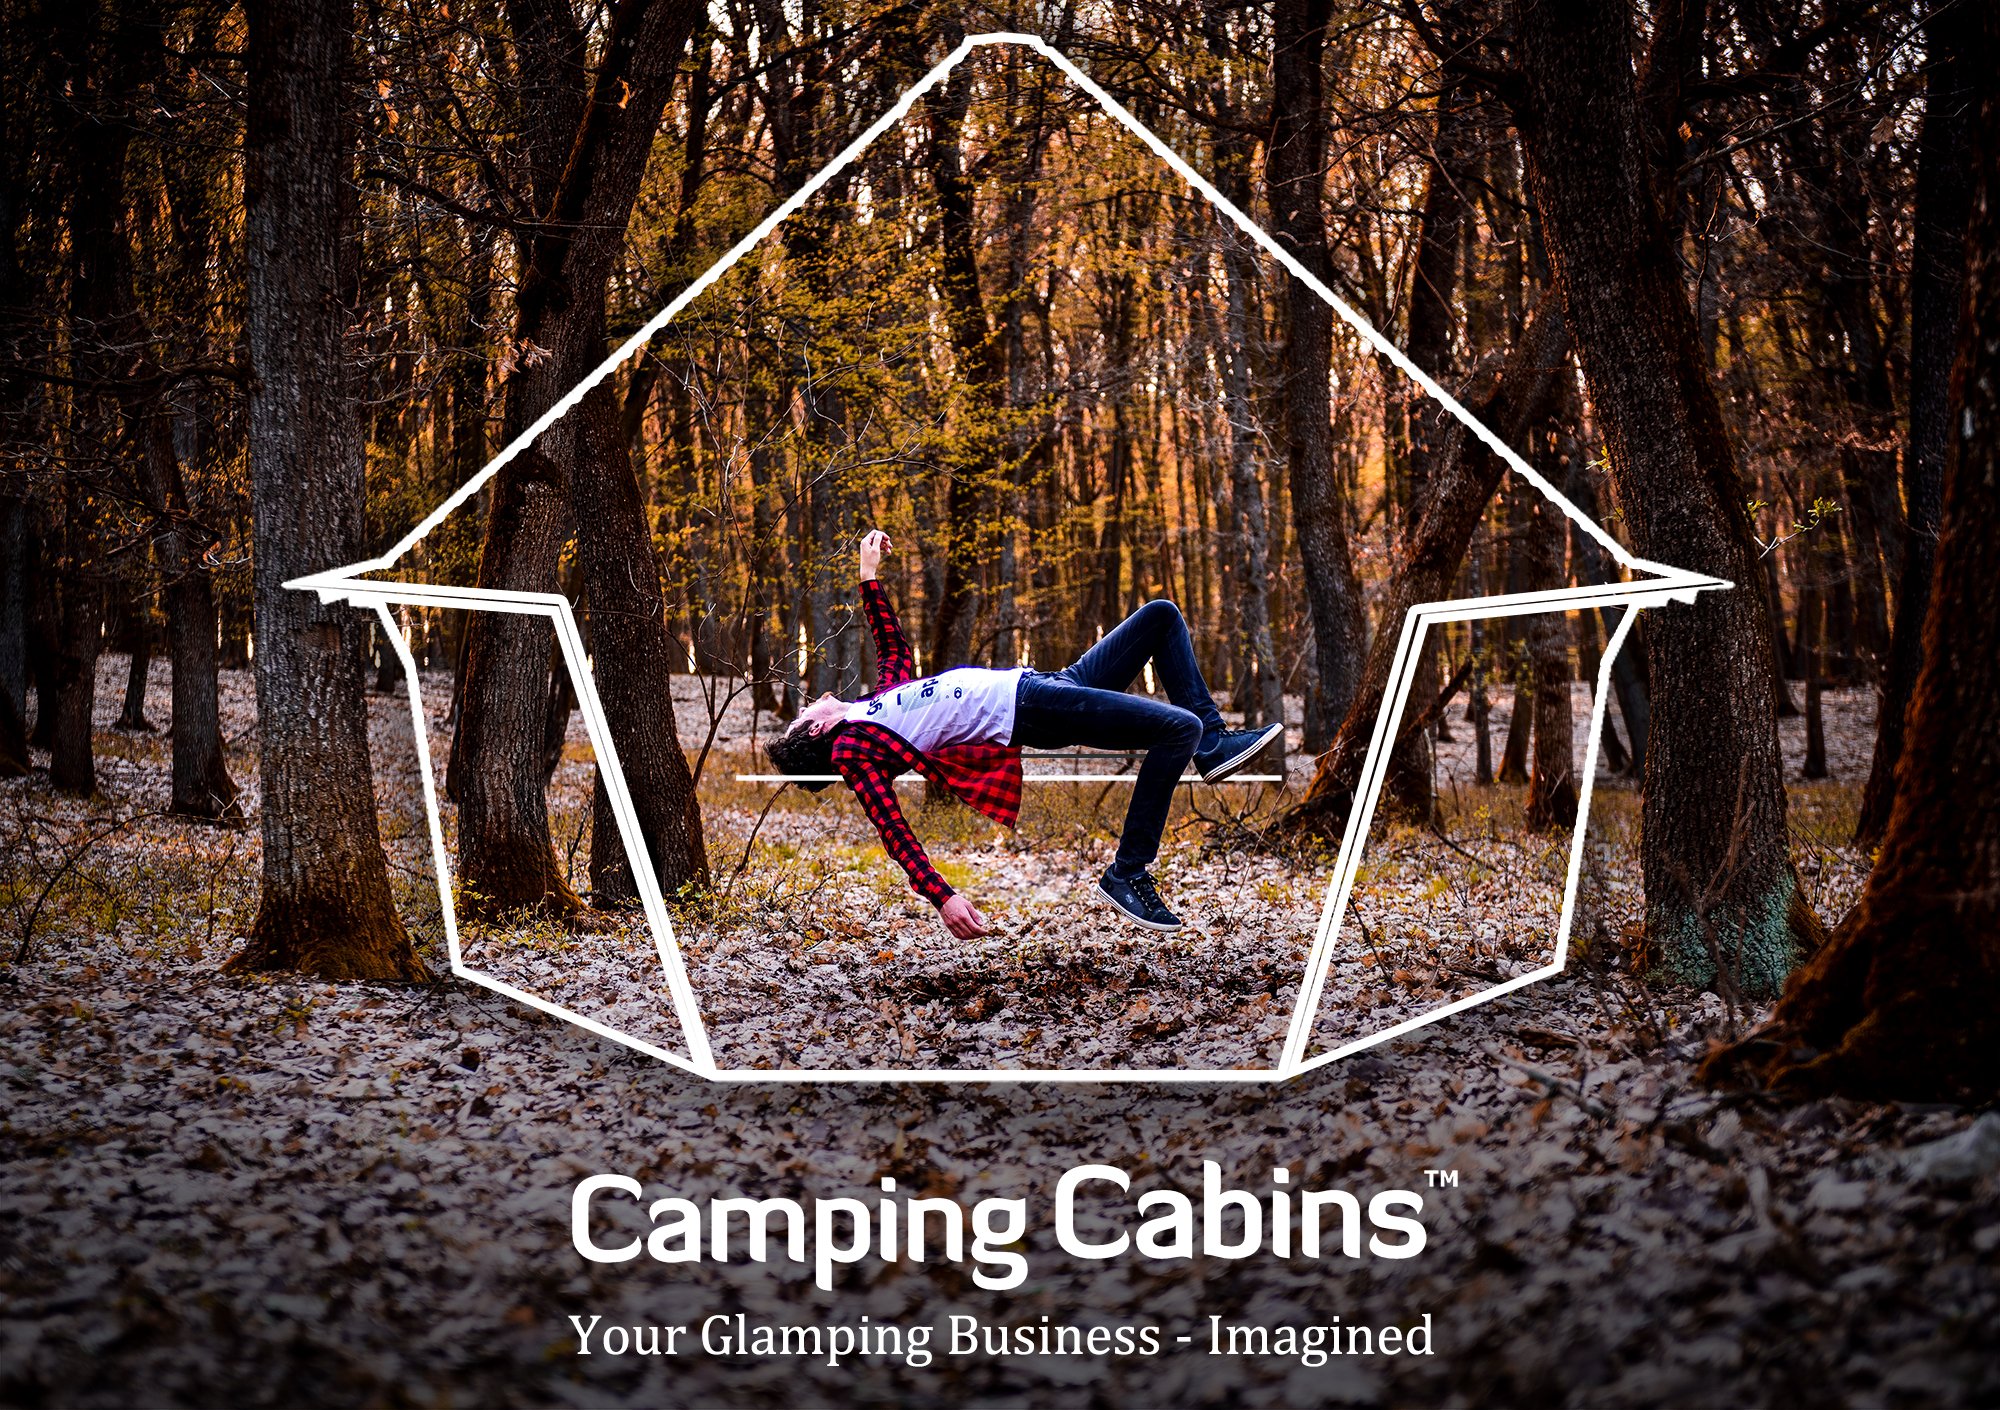 Camping cabins you glamping business imagined